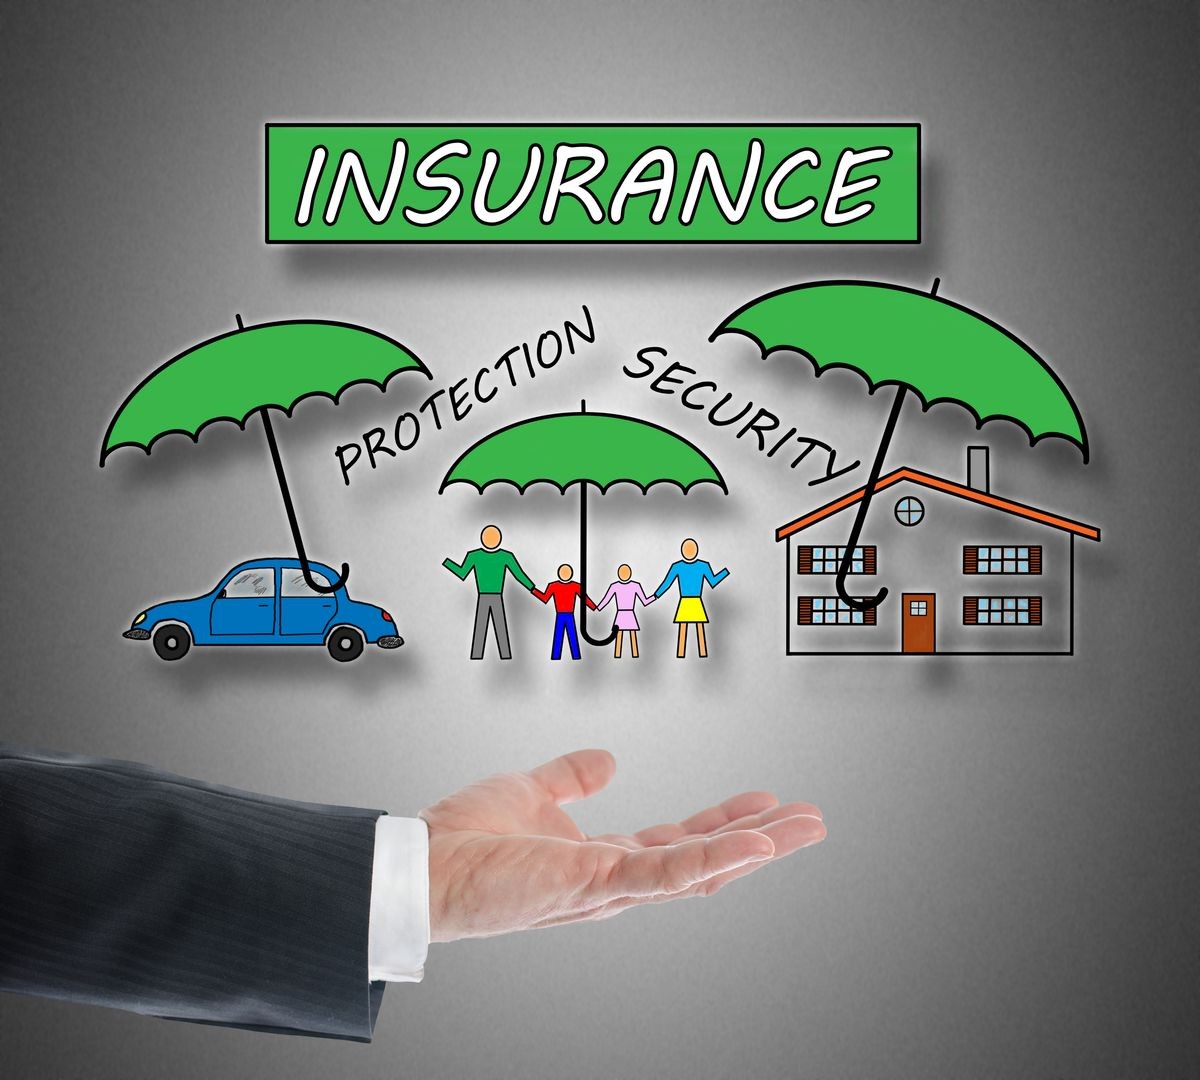 Insurance concept levitating above a hand on grey background